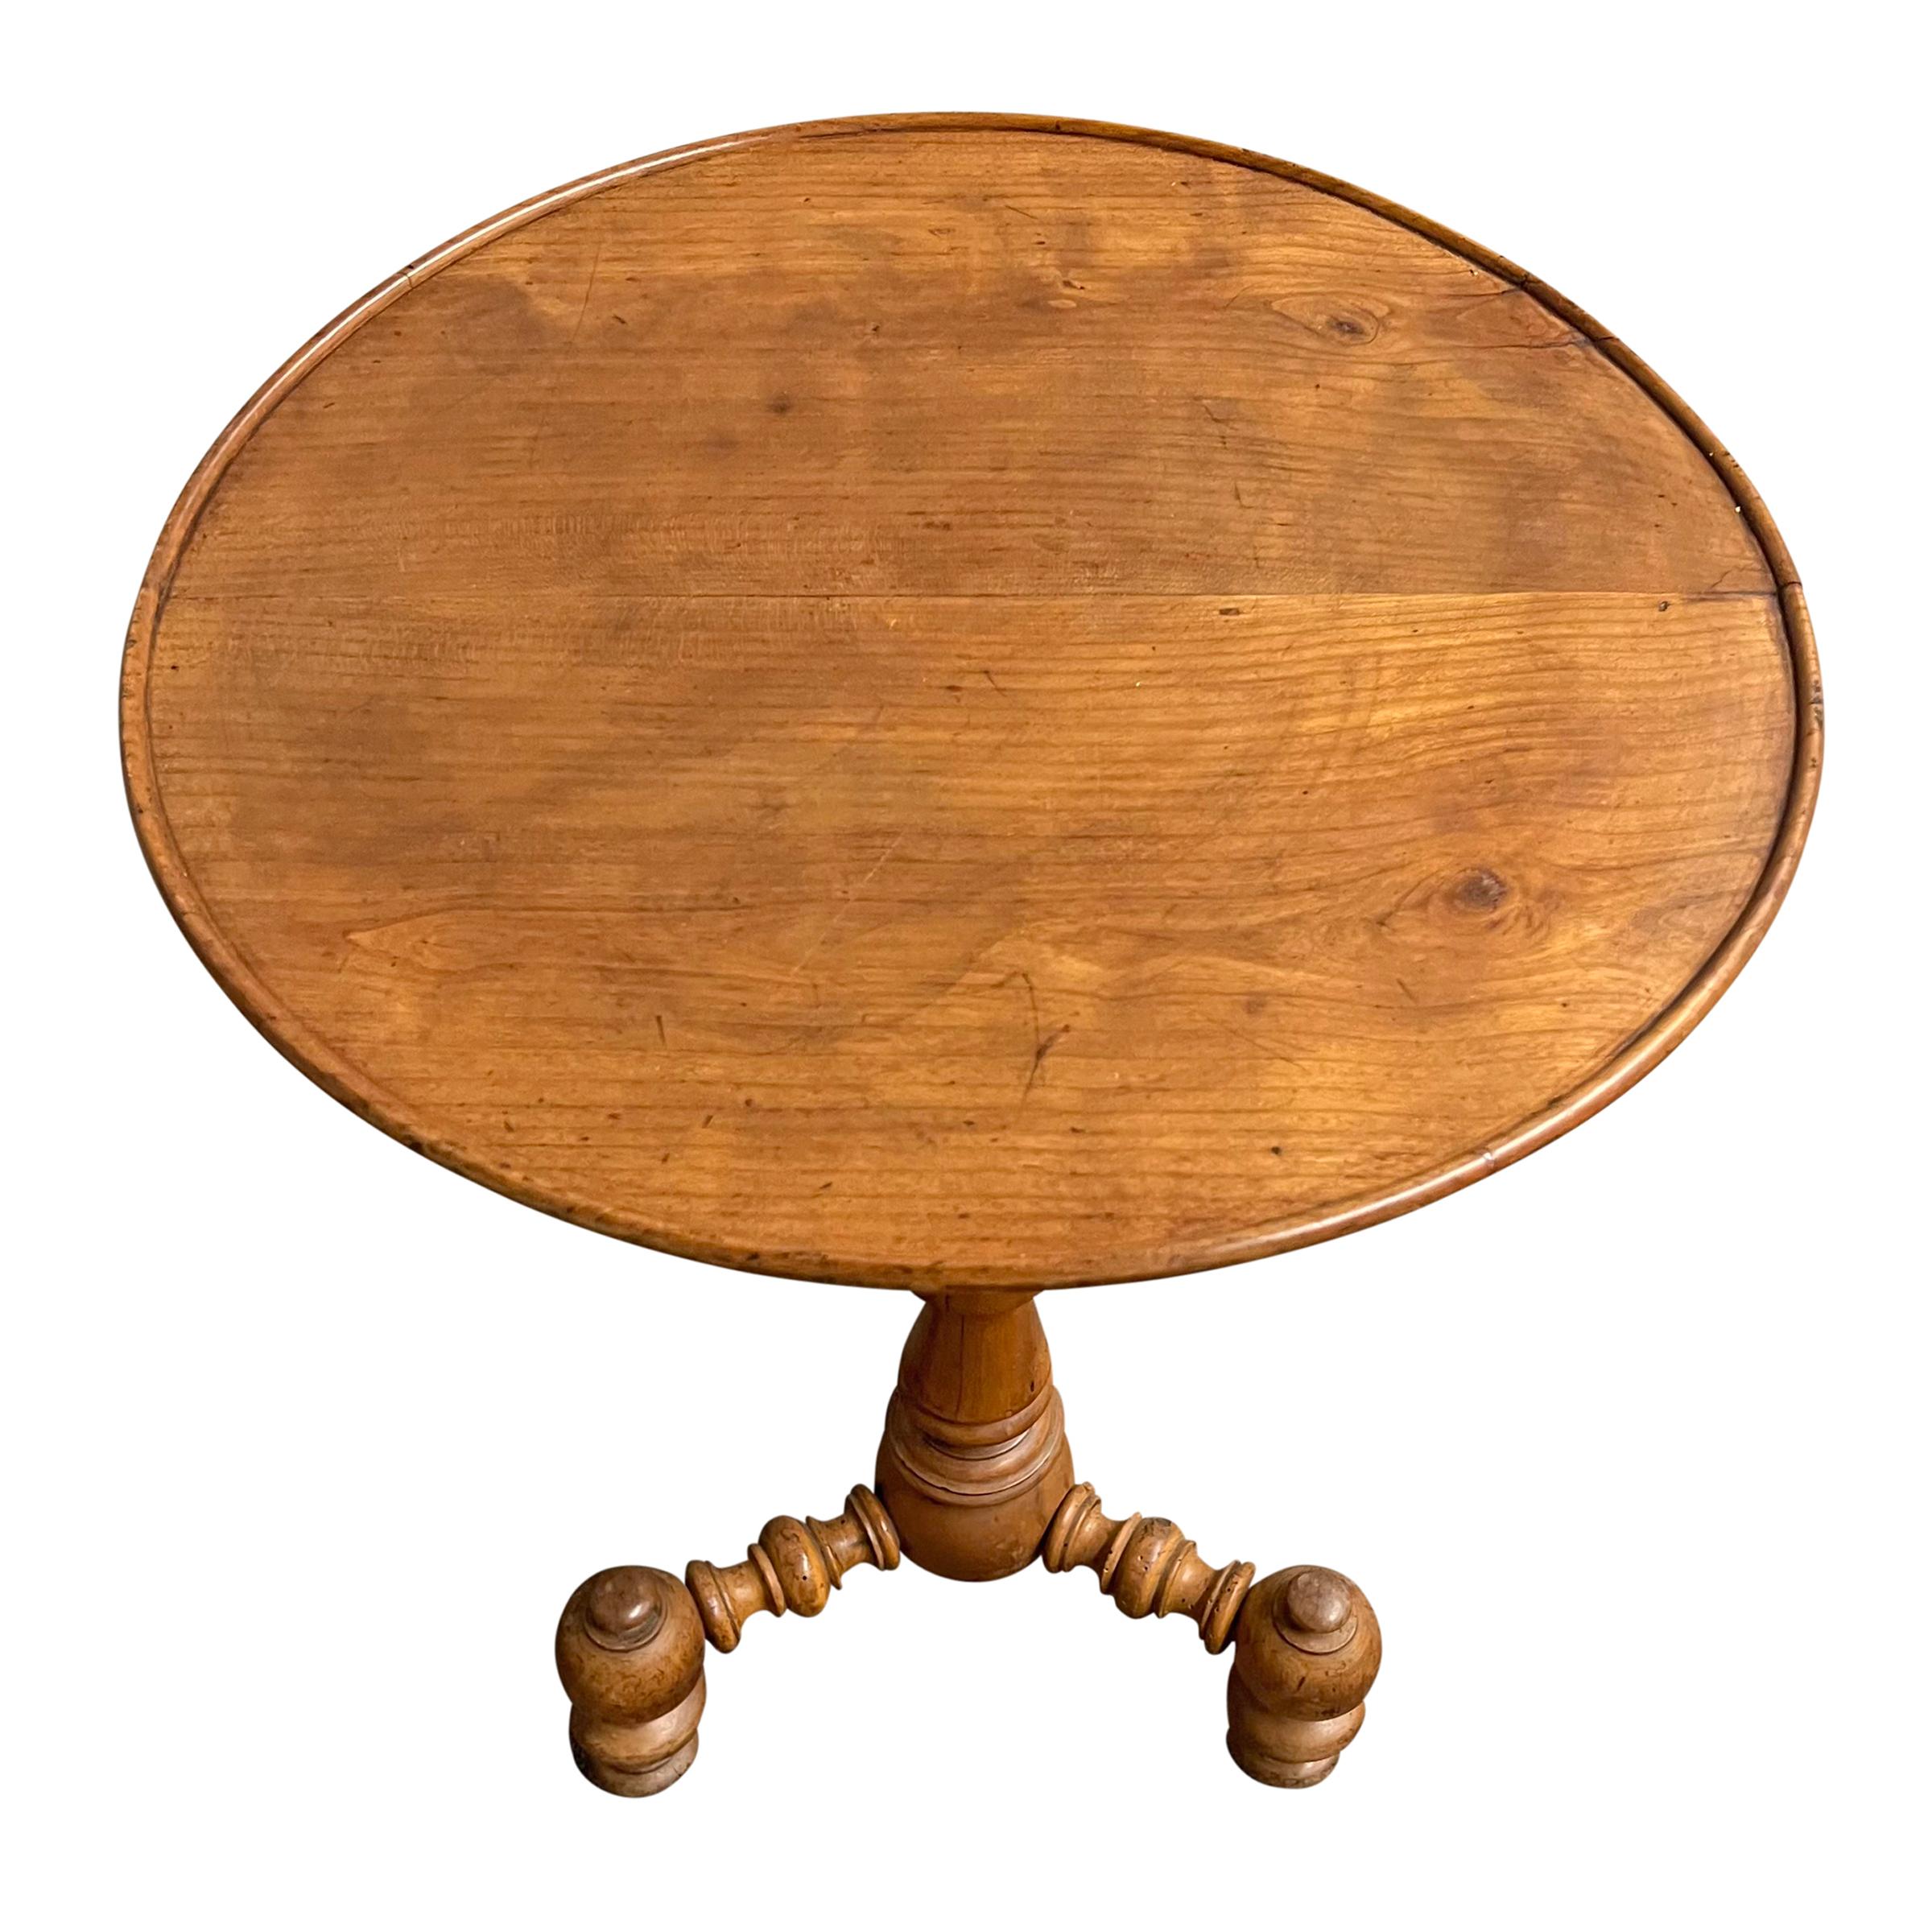 Fruitwood Late 18th Century French Provincial Turned Table